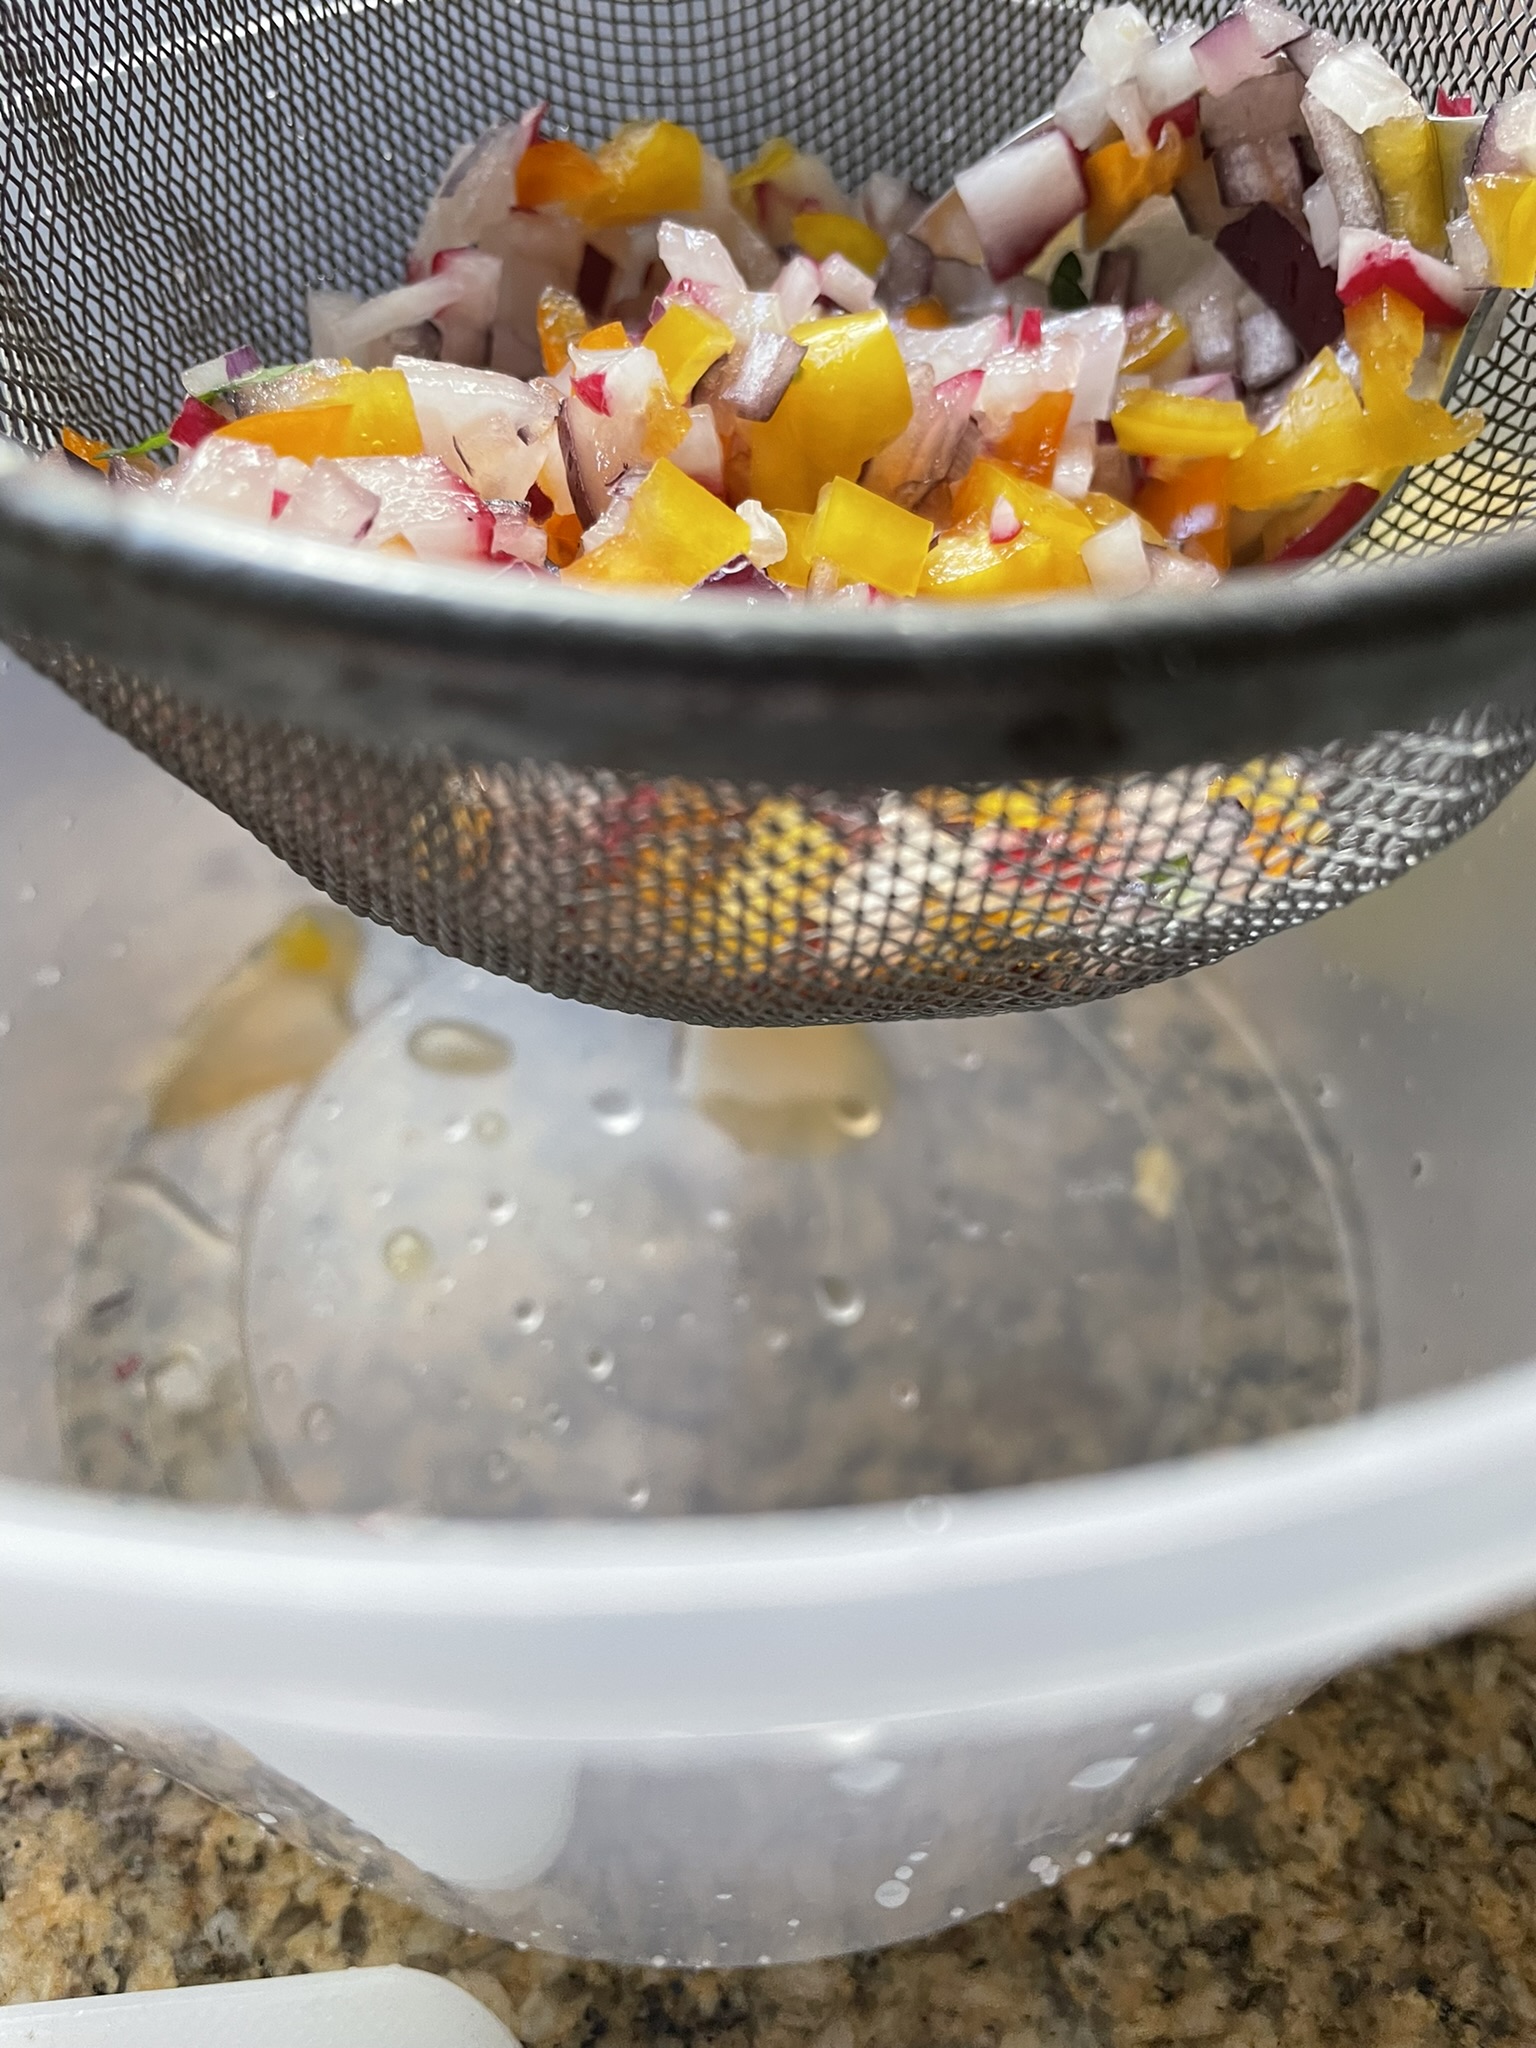 Allow salted diced vegetables to drain in a sieve.